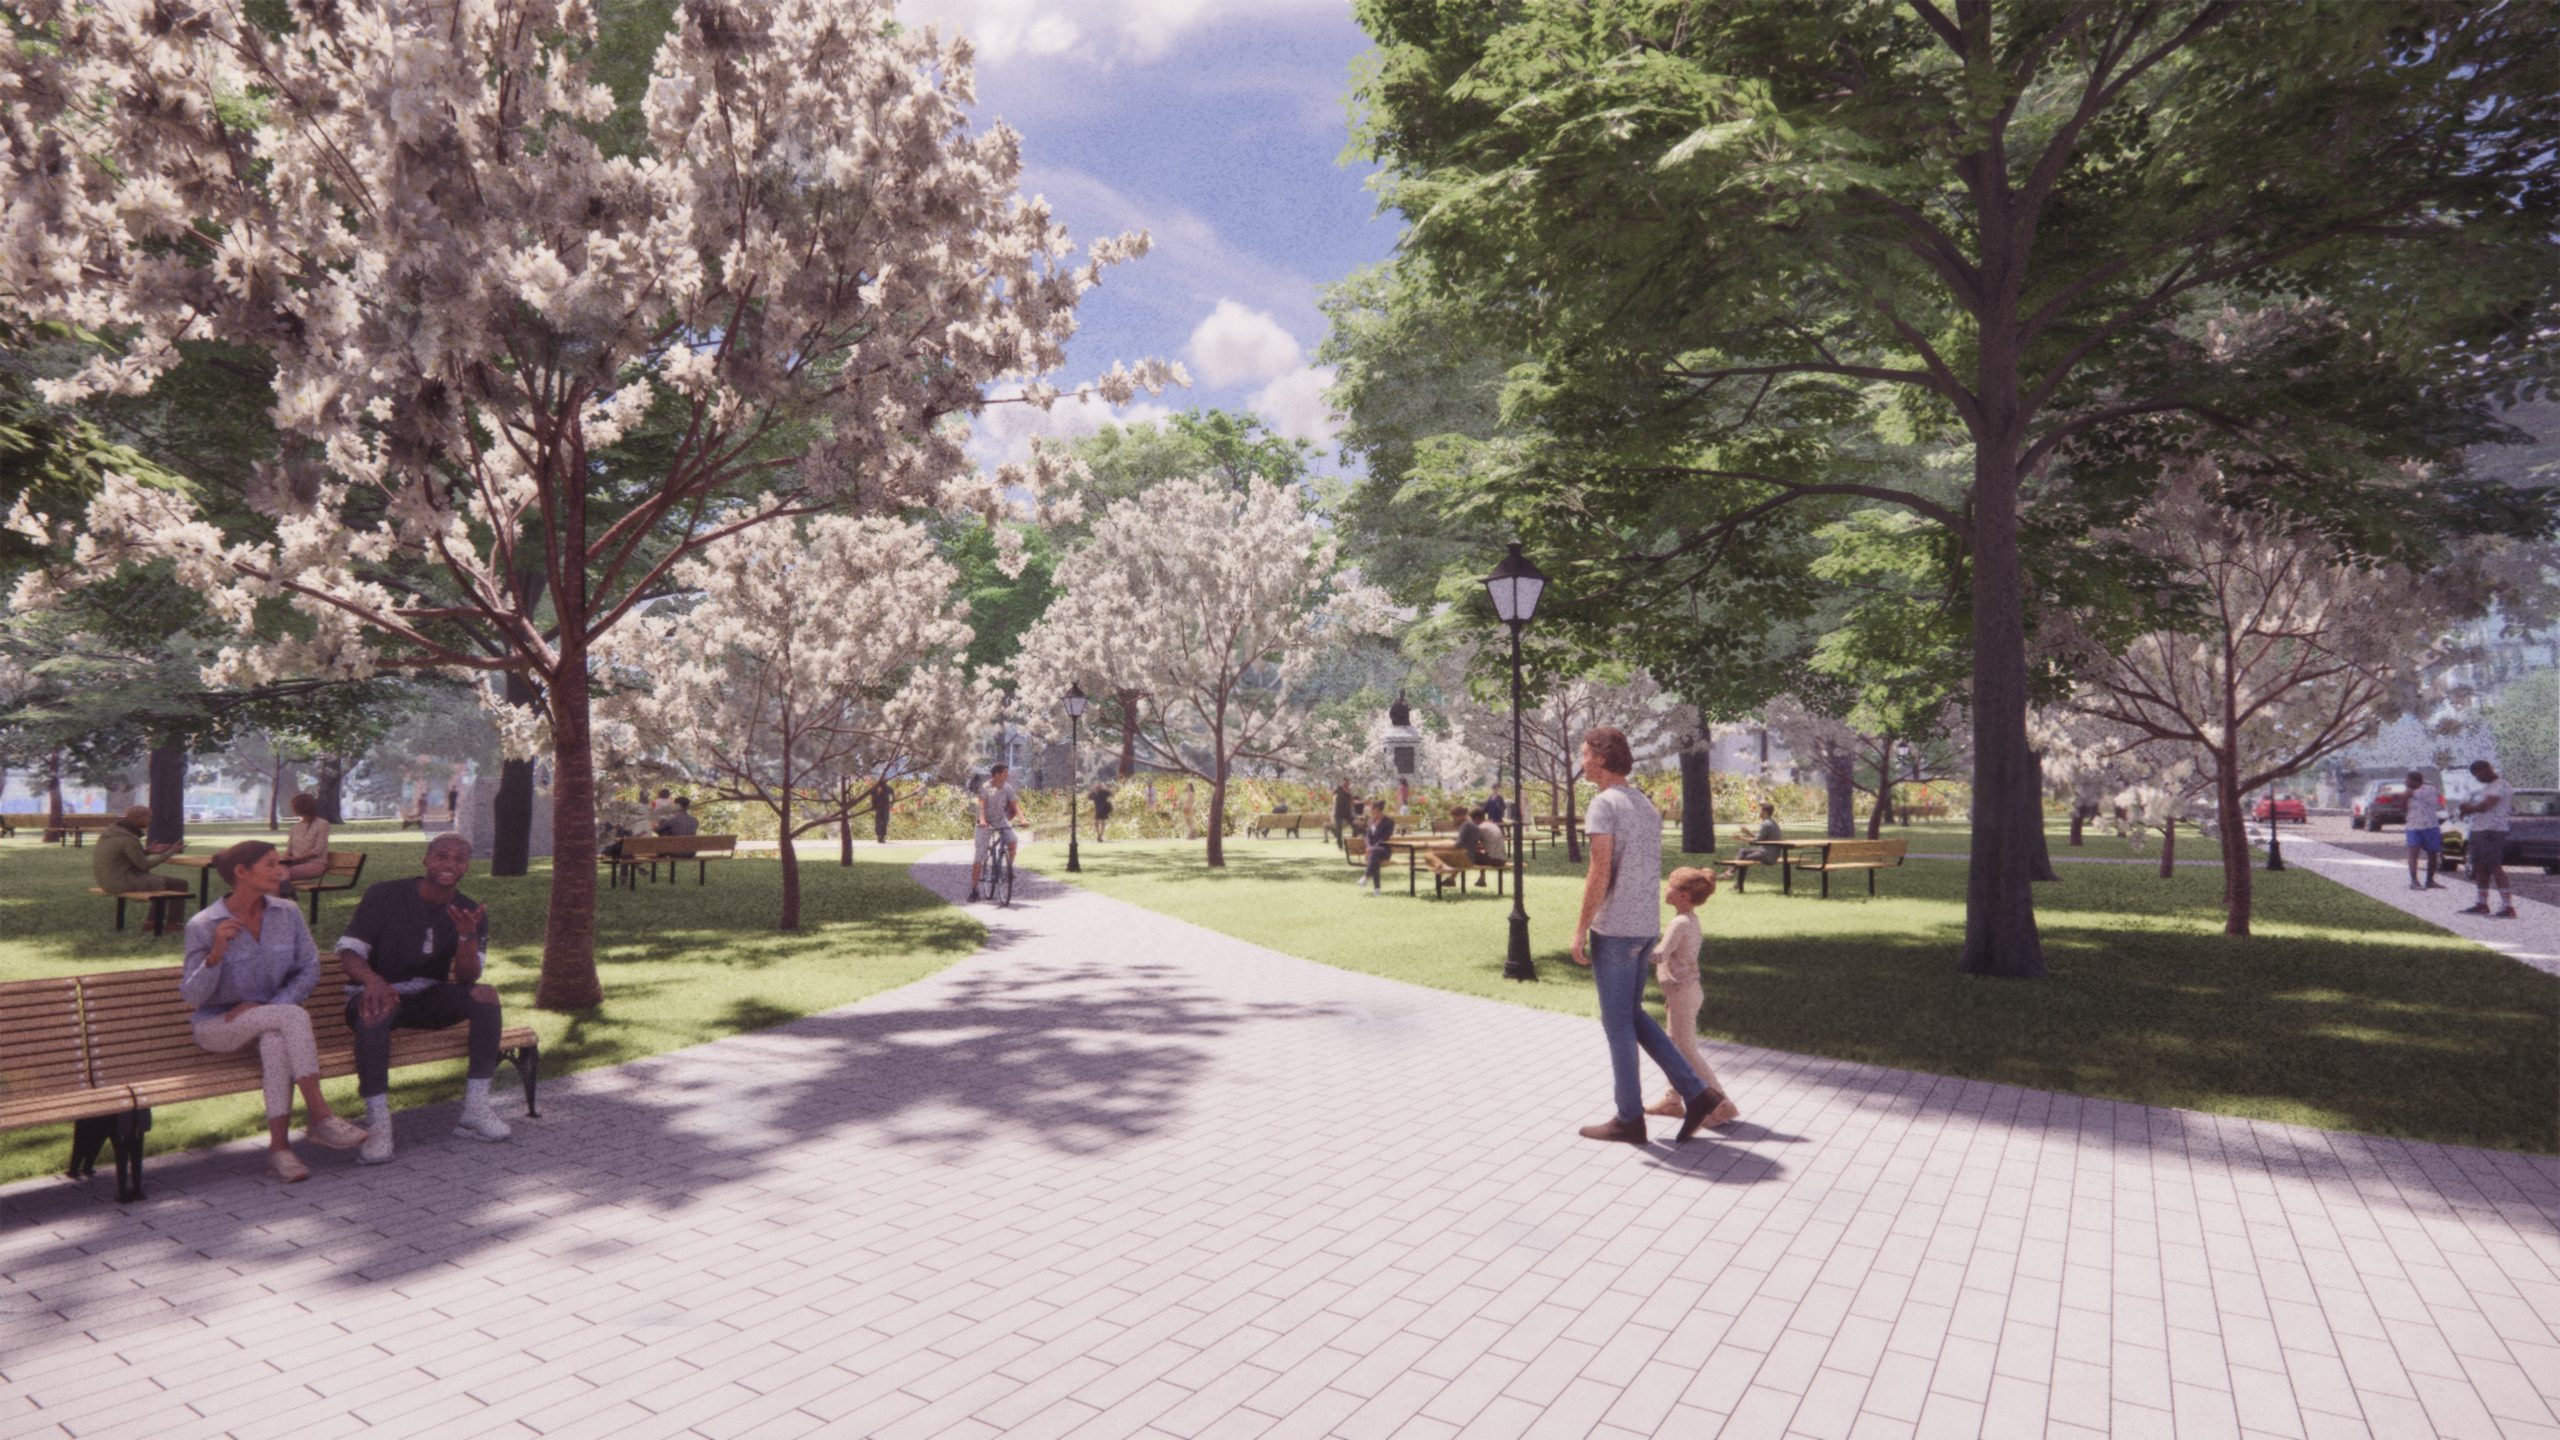 Rendered view looking southwest shows the north east entrance to the park, where people are sitting on benches and picnic tables. There is a path leading into the centre of the park, where you can see mounds of flowering meadow covering the cemetery, and a glimpse of the 1812 memorial in the centre of the cemetery. The view is framed by a mature canopy of trees, and additional younger flowering trees.